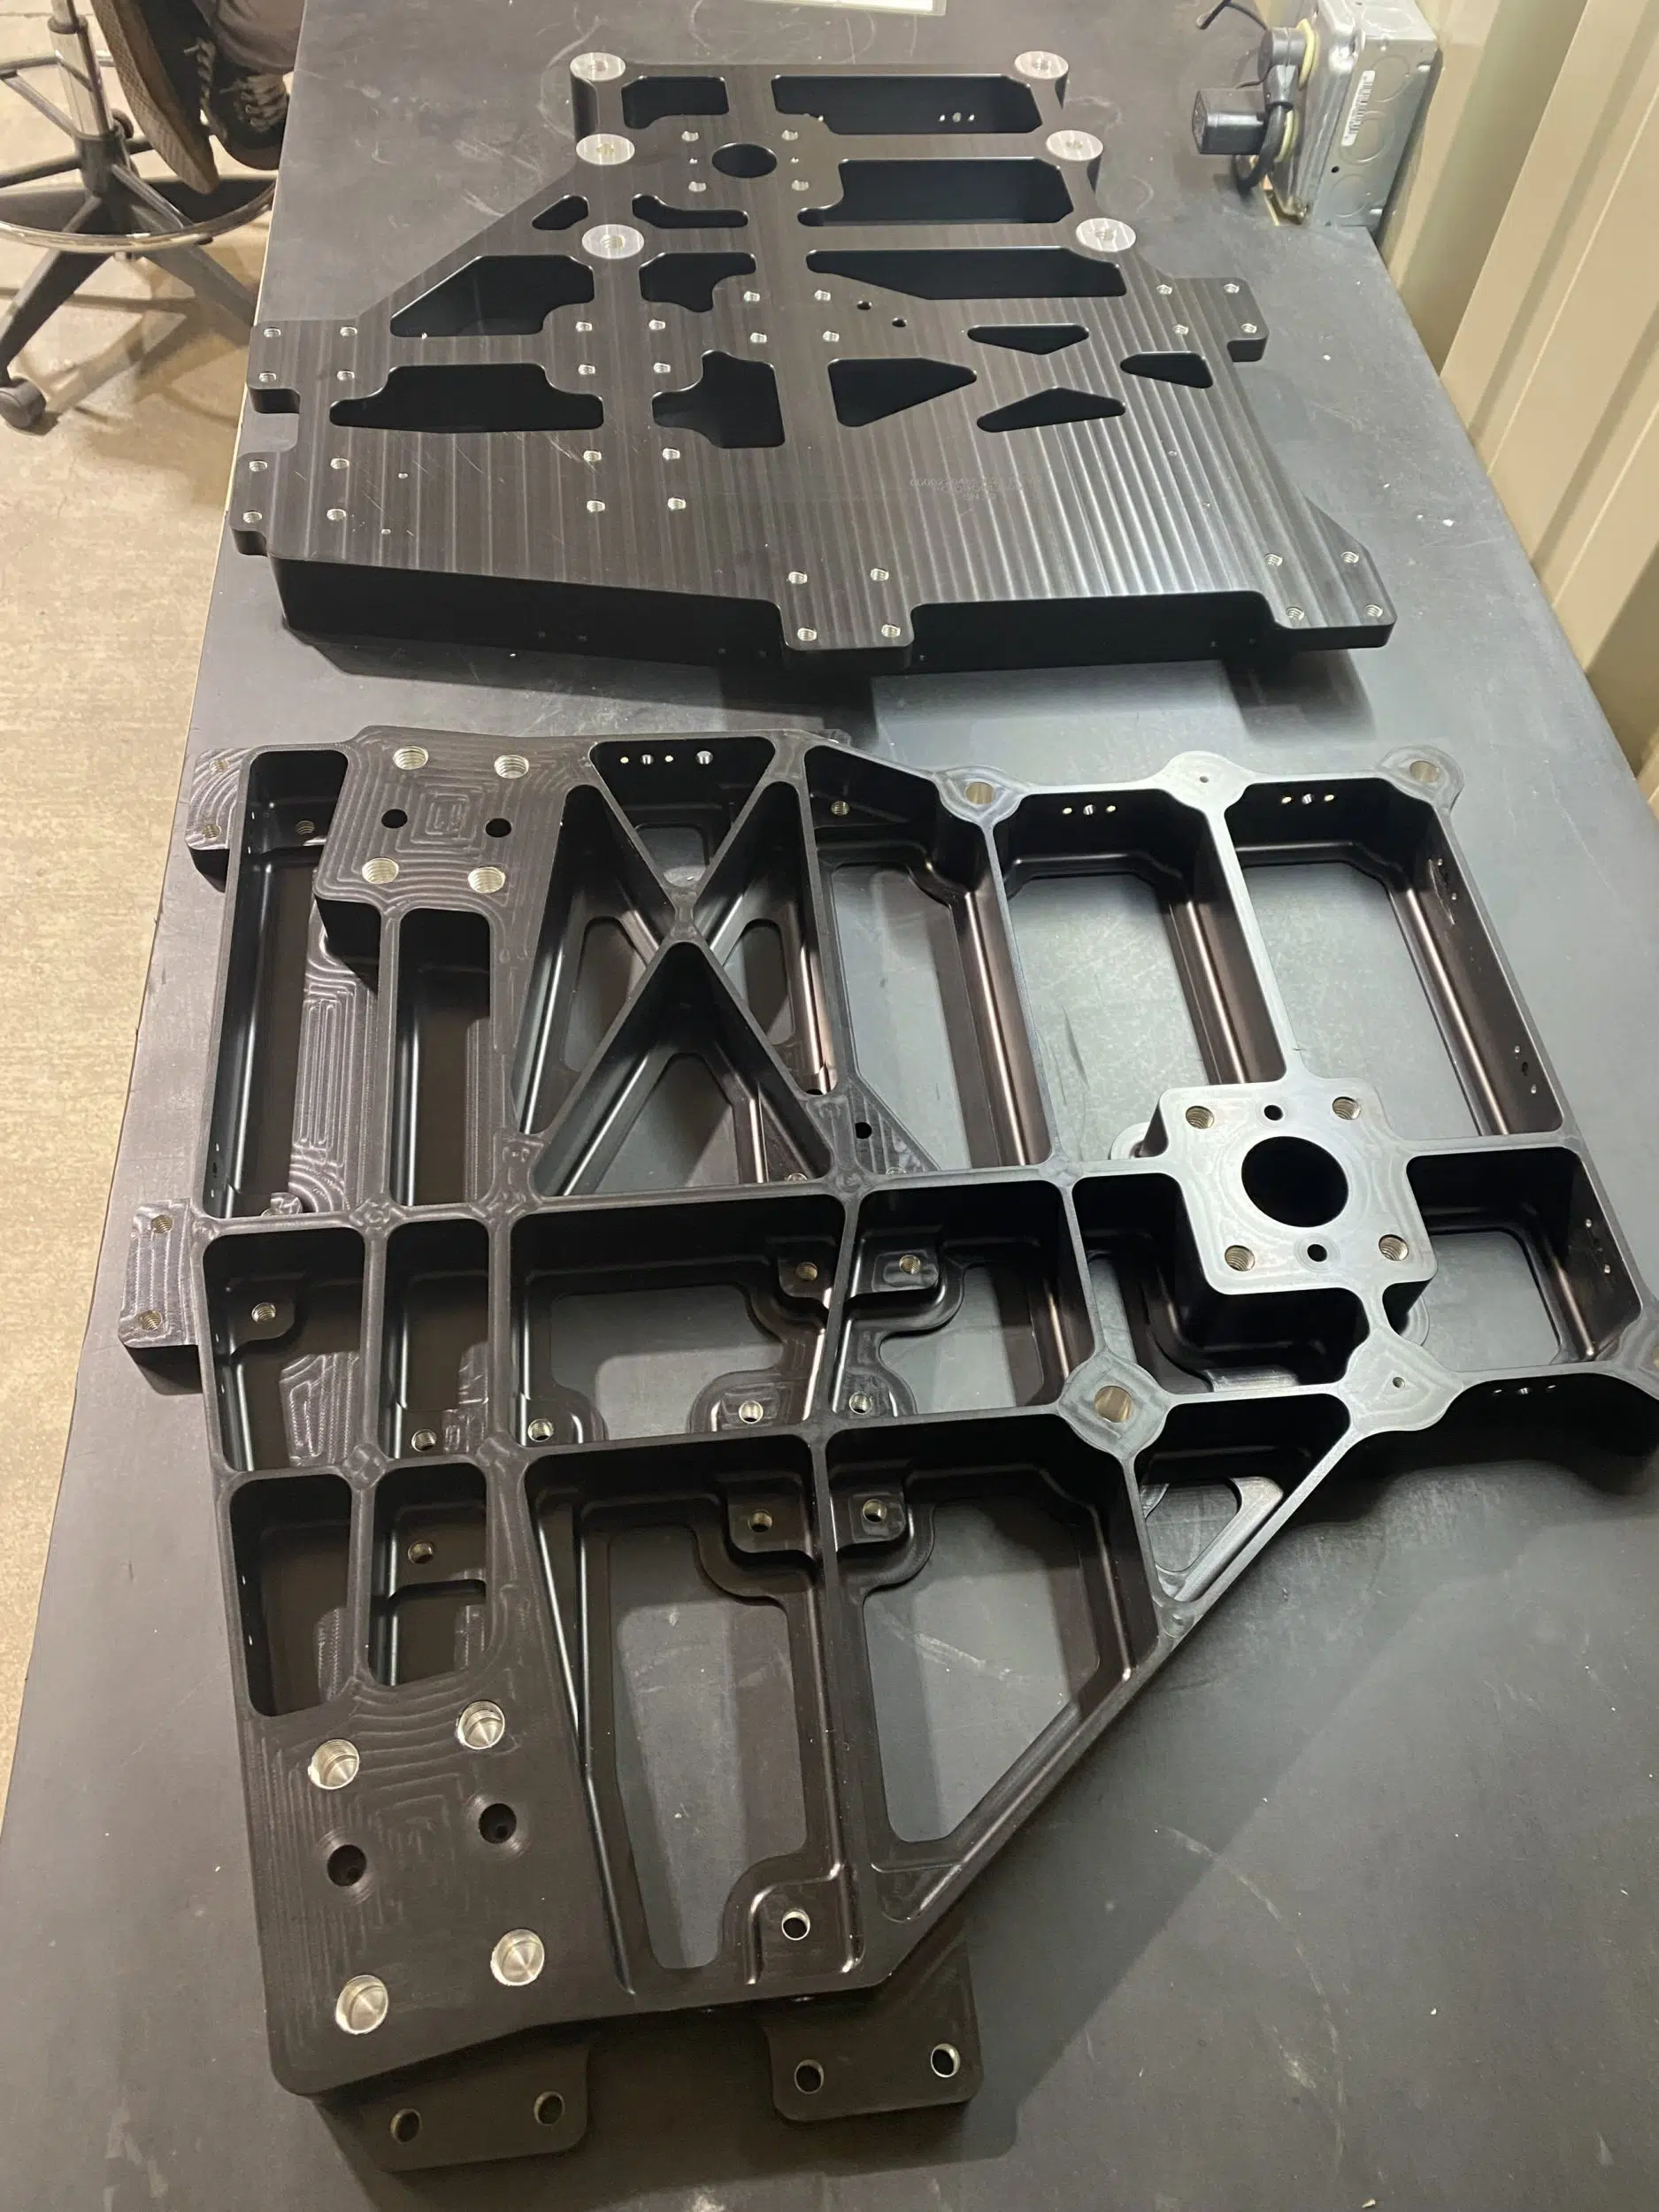 Aluminum Rocket Brackets finished with Chemical Conversion and Hard Black Anodize